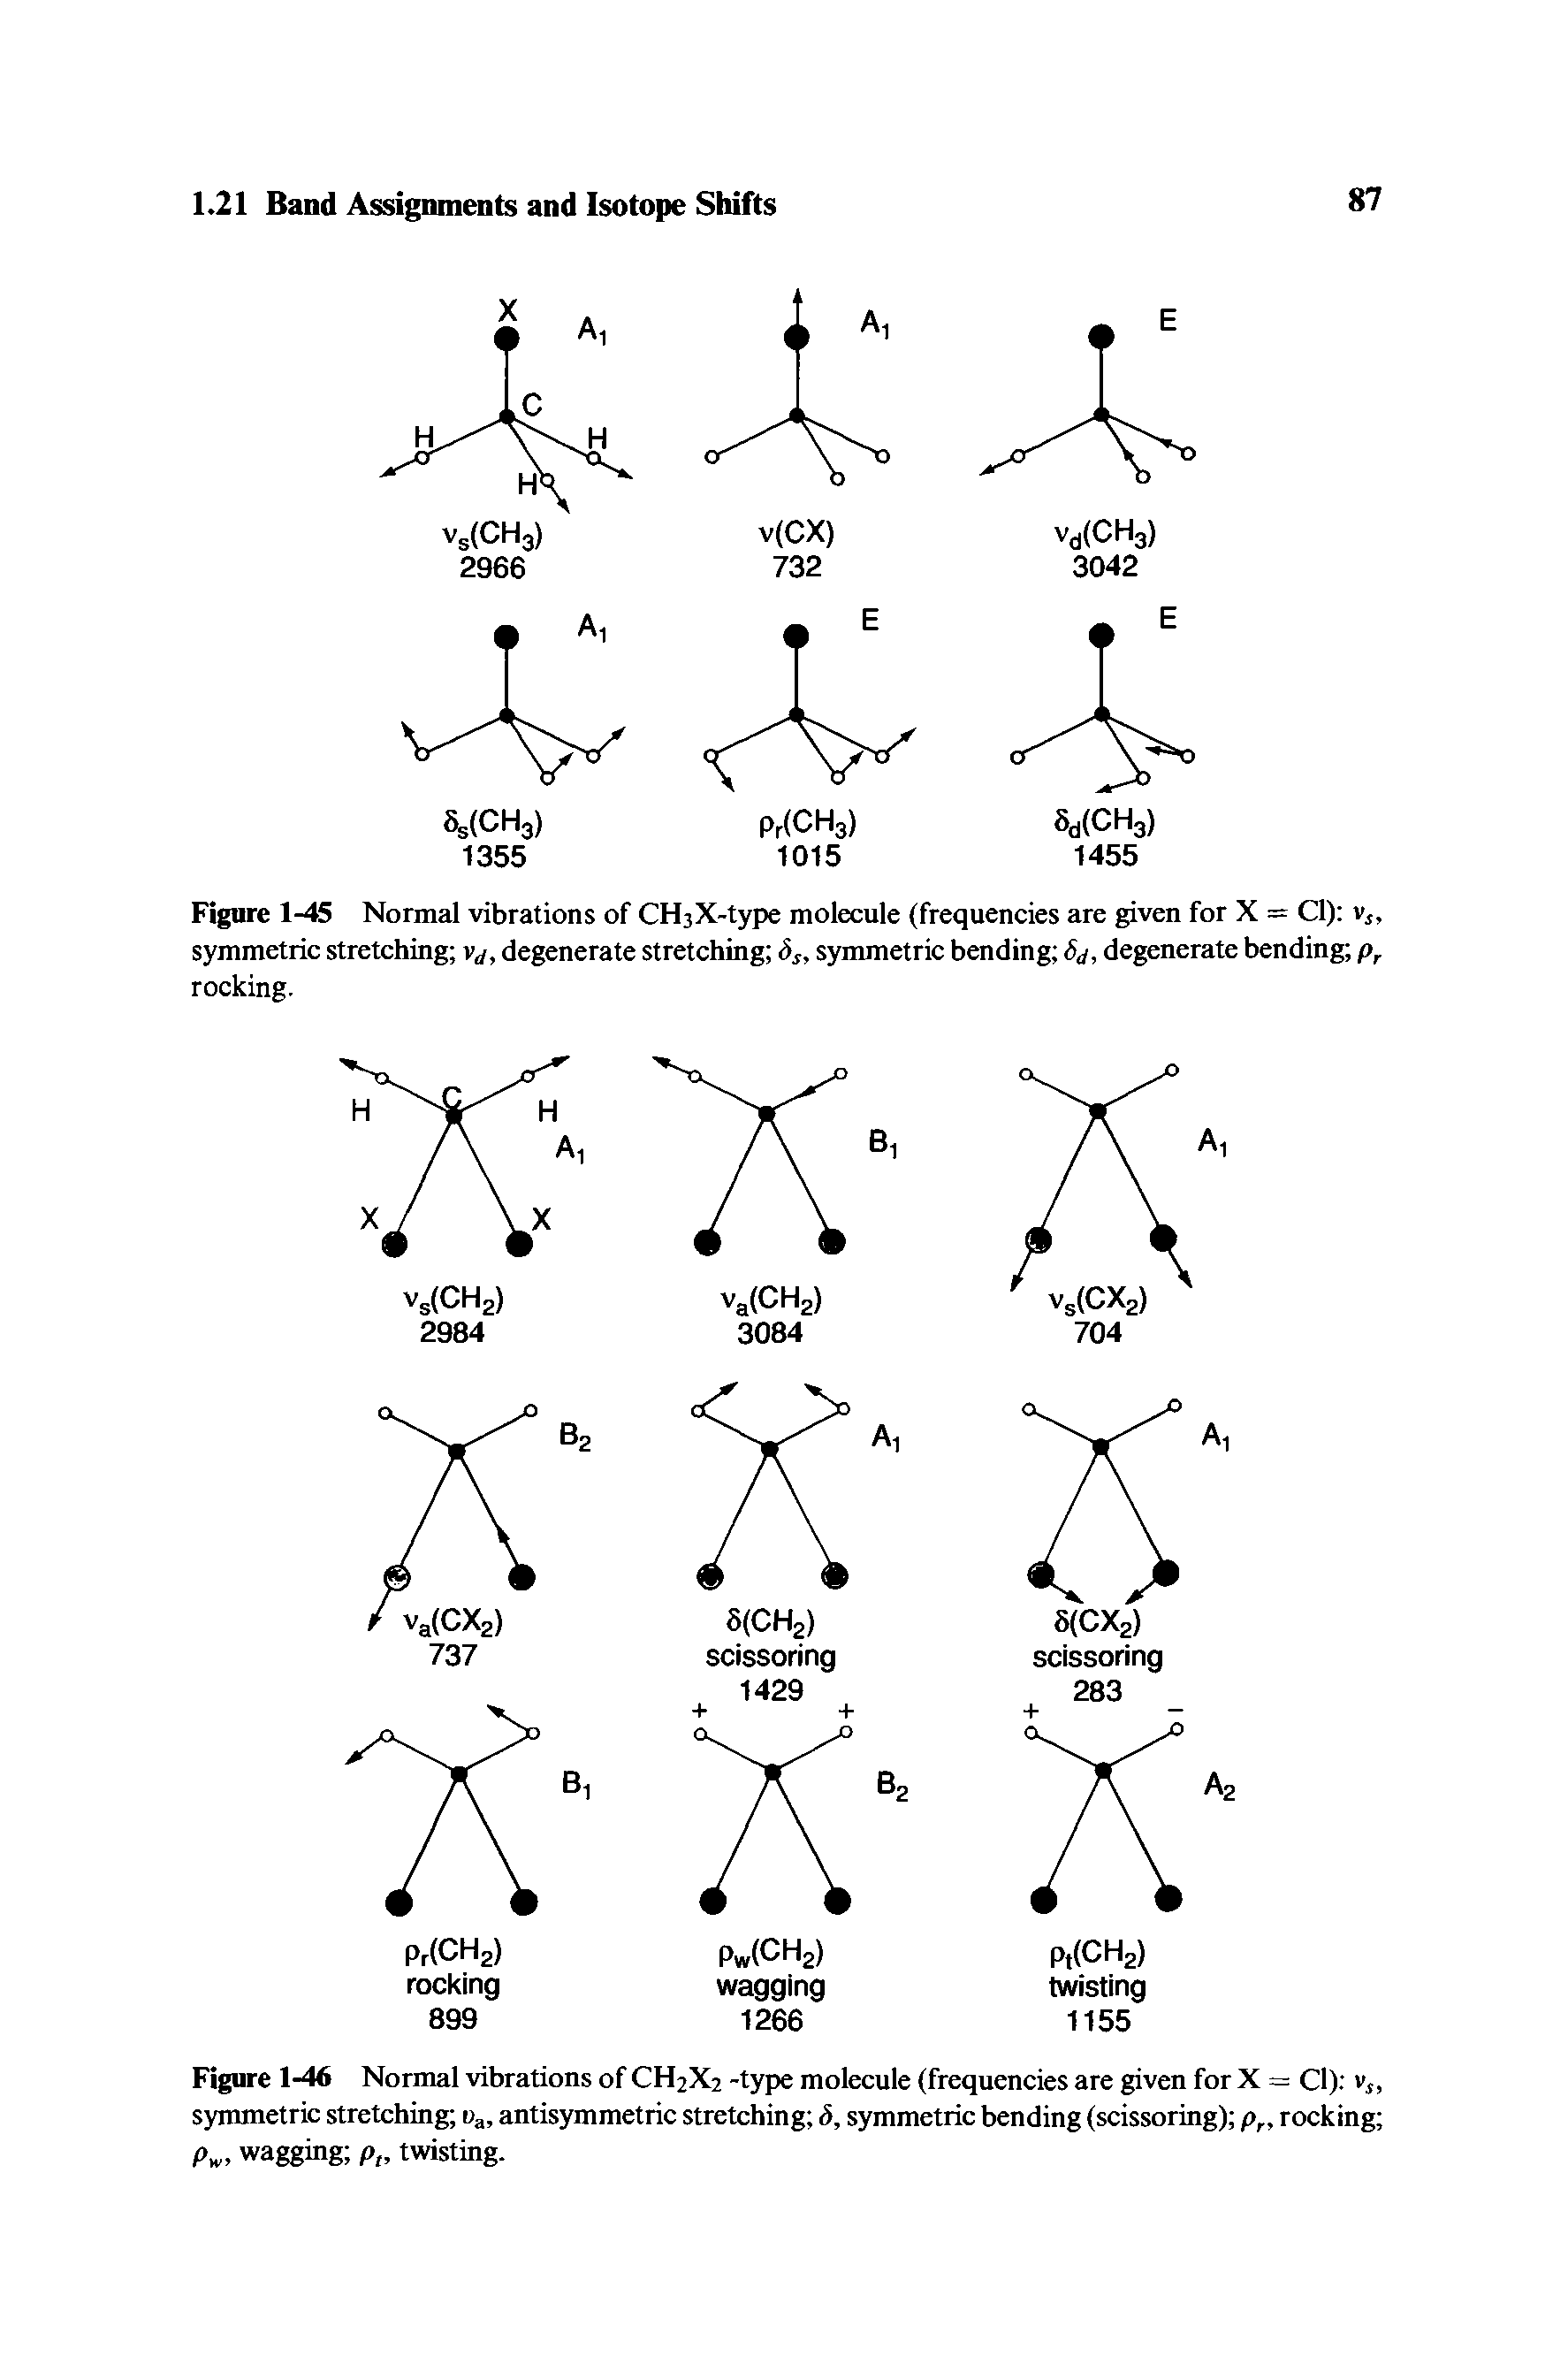 Figure 1-45 Normal vibrations of CH3X-type molecule (frequencies are given for X = Cl) v symmetric stretching vj, degenerate stretching 8S, symmetric bending 8j, degenerate bending pr rocking.